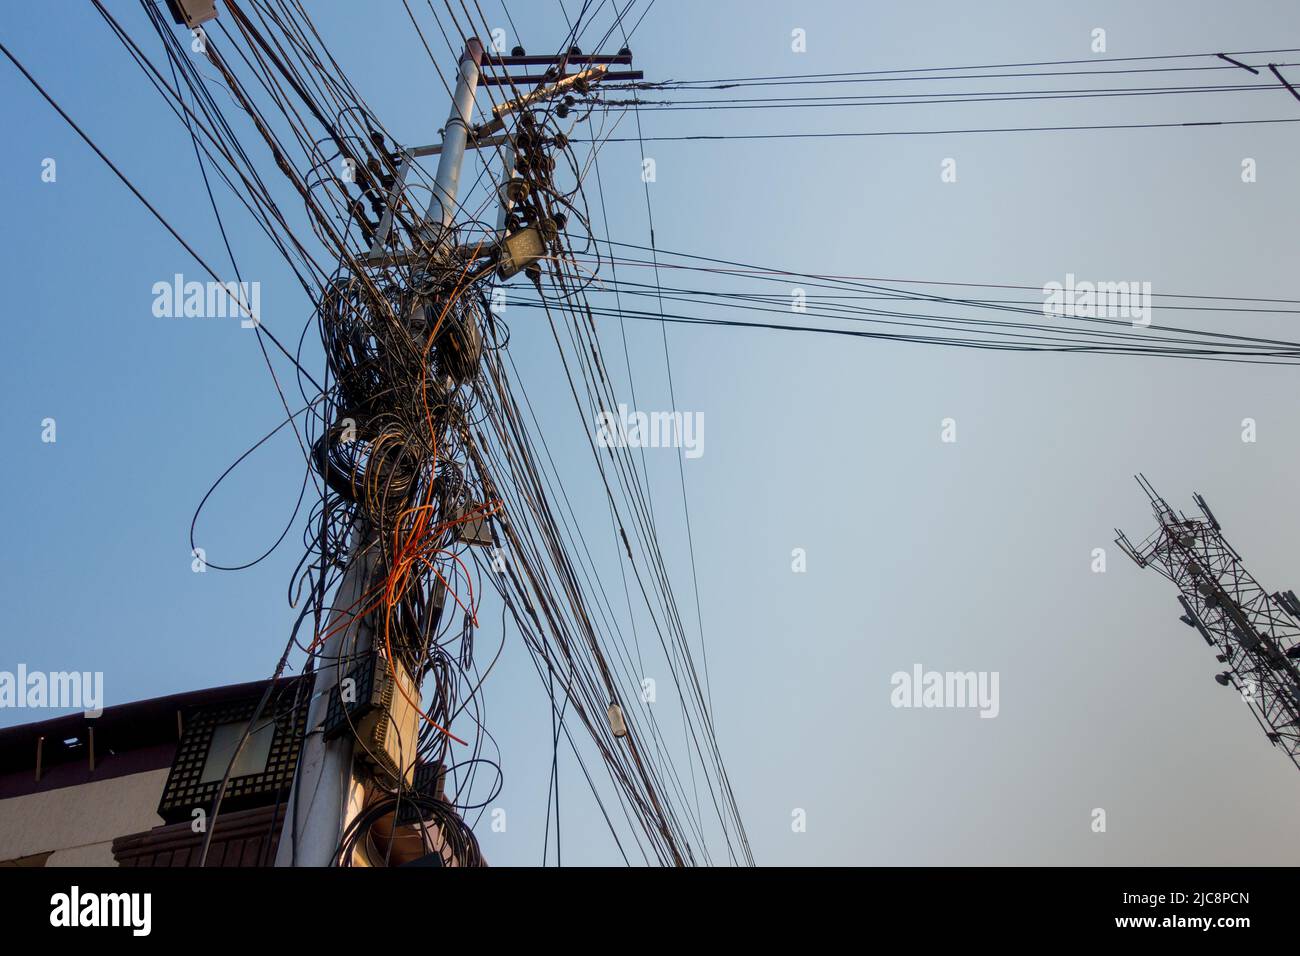 Electricity poles with overcrowded wires and distribution boxes in India. Stock Photo